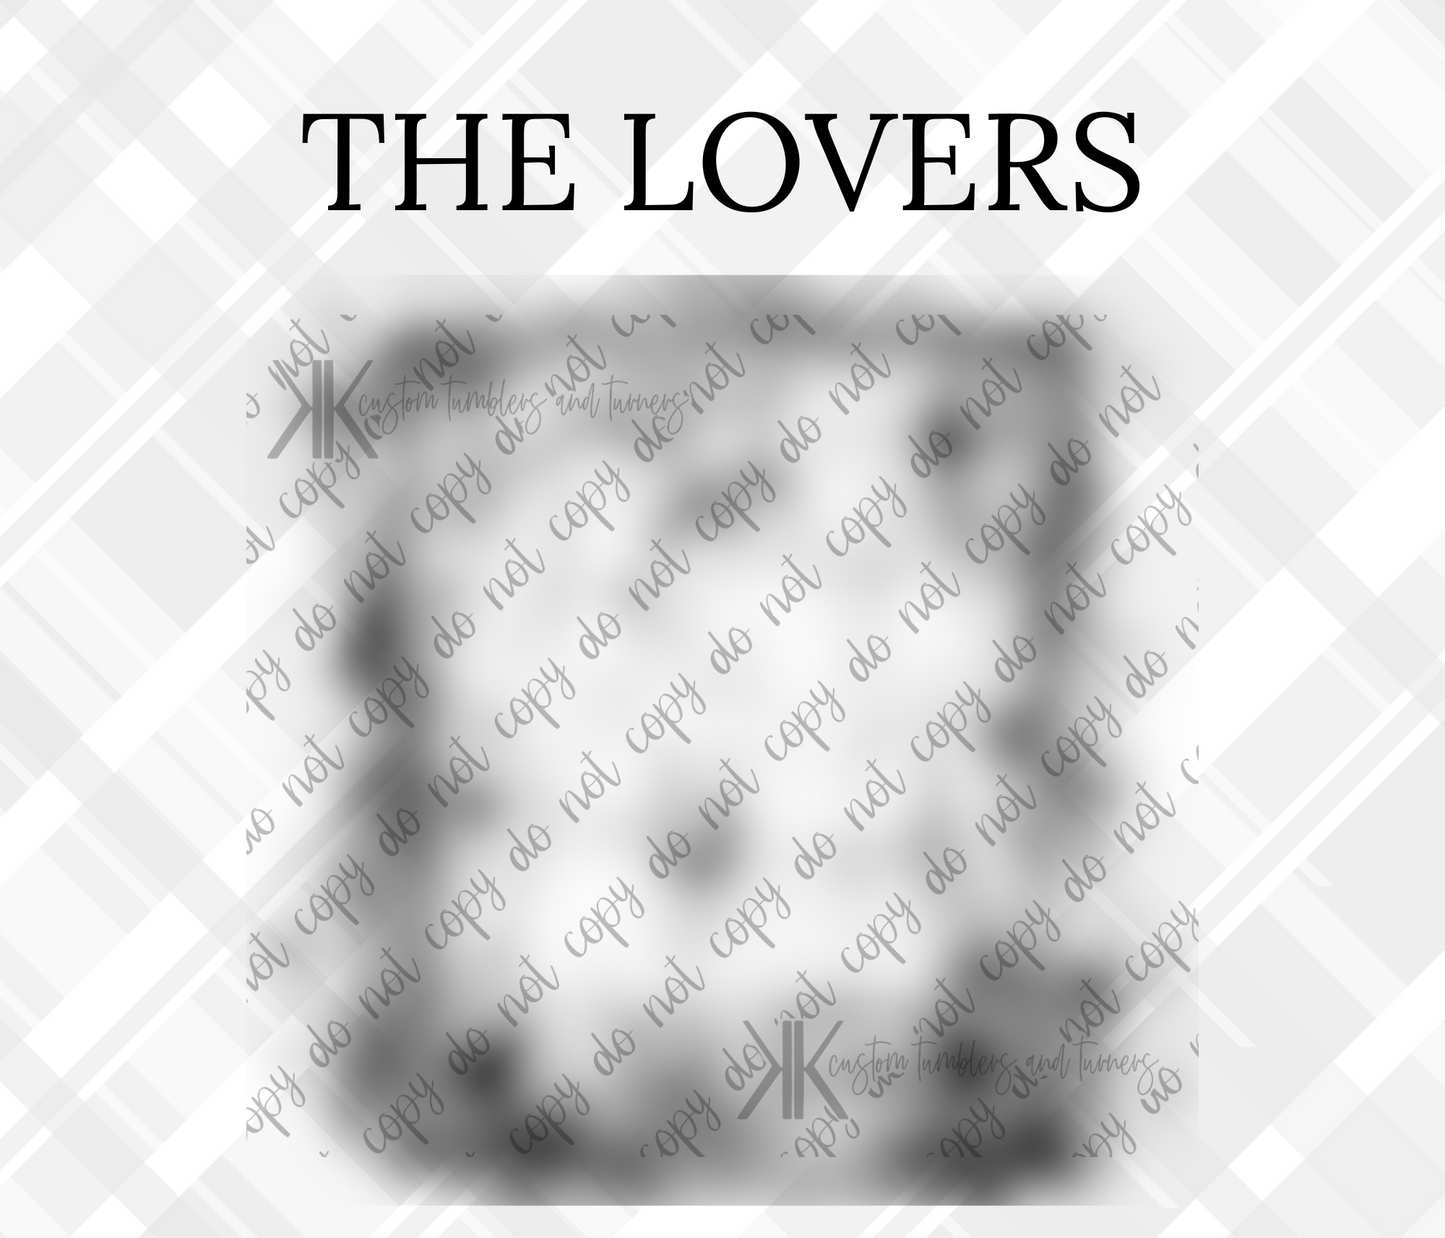 THE LOVERS